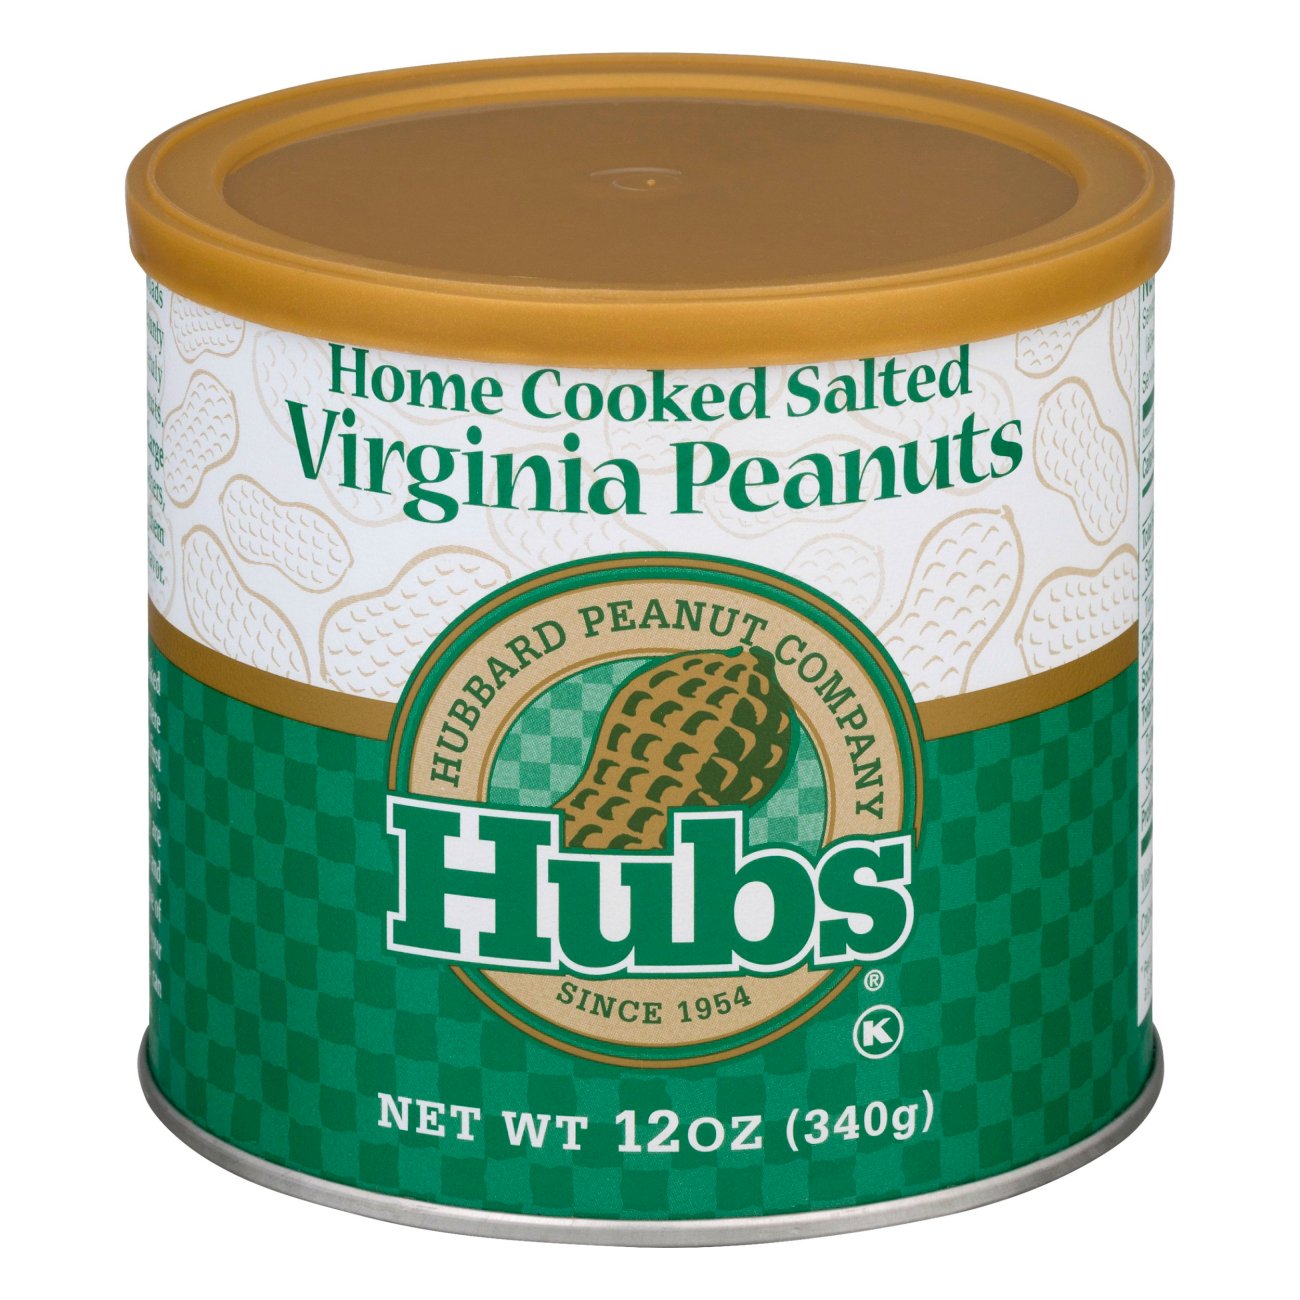 Hubs Home Cooked Salted Virginia Peanuts Shop Nuts & Seeds at HEB